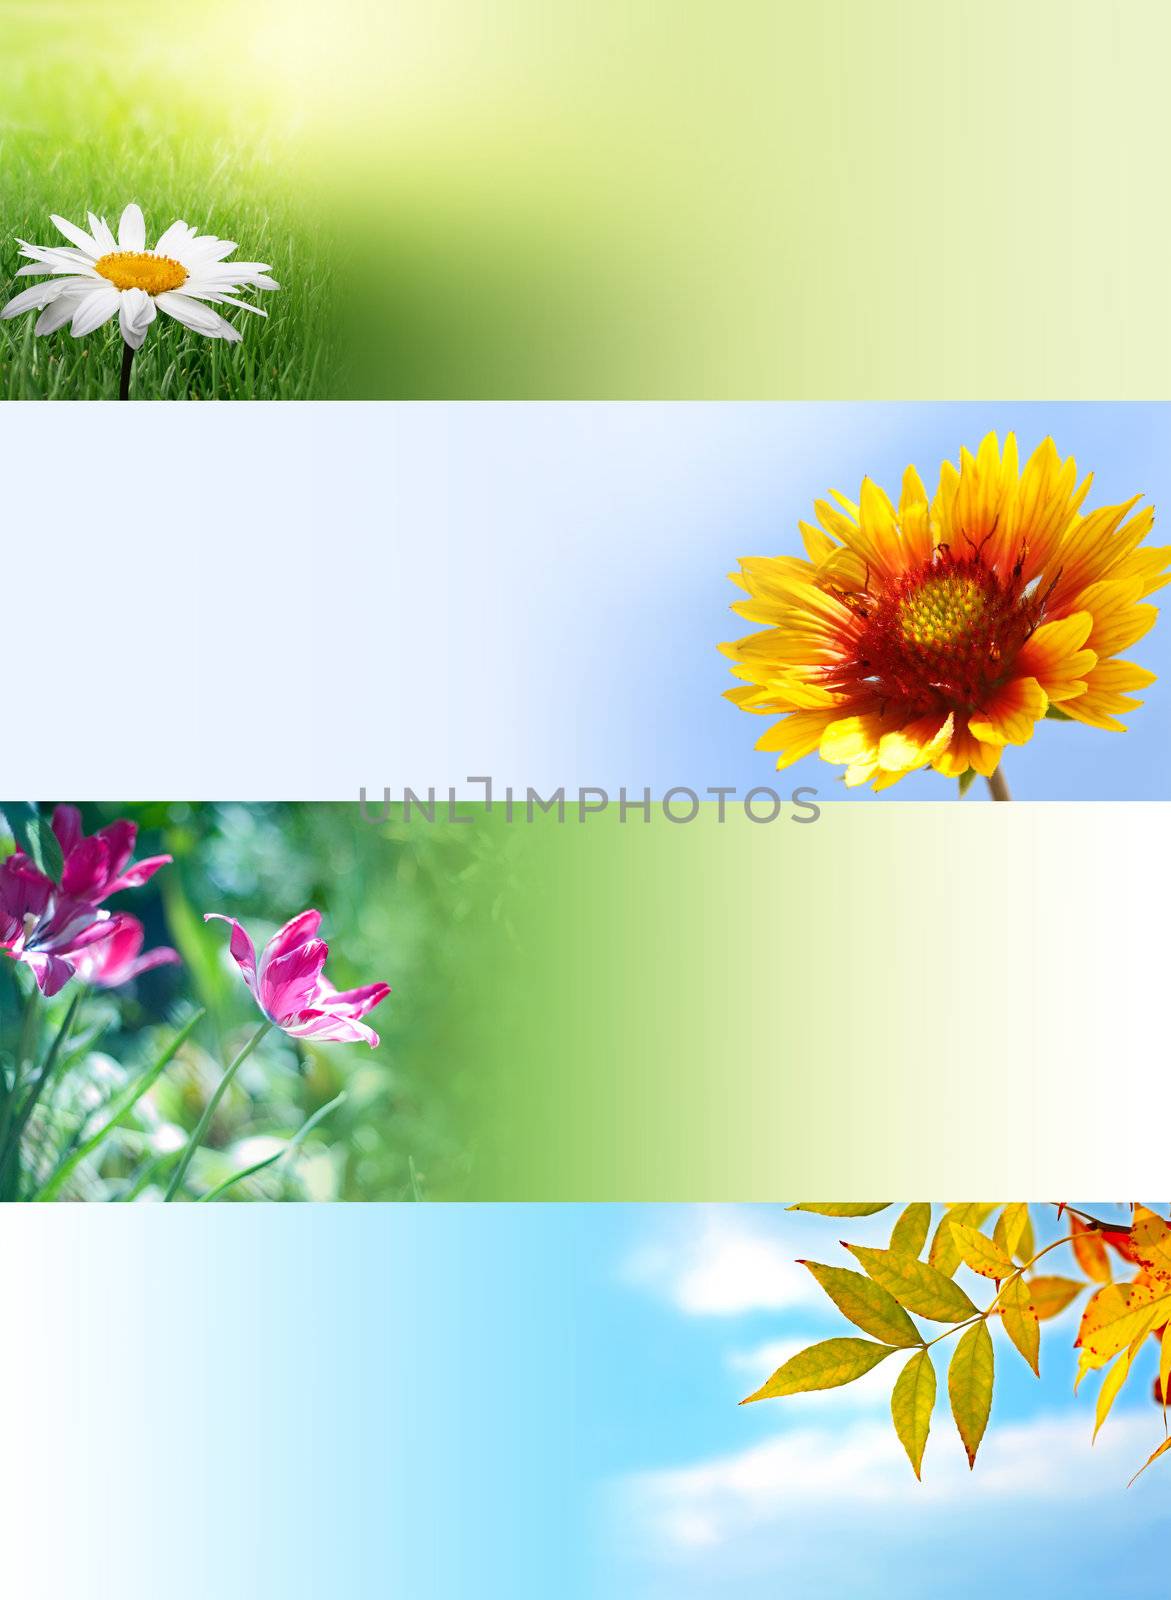 set of flower banners by rudchenko